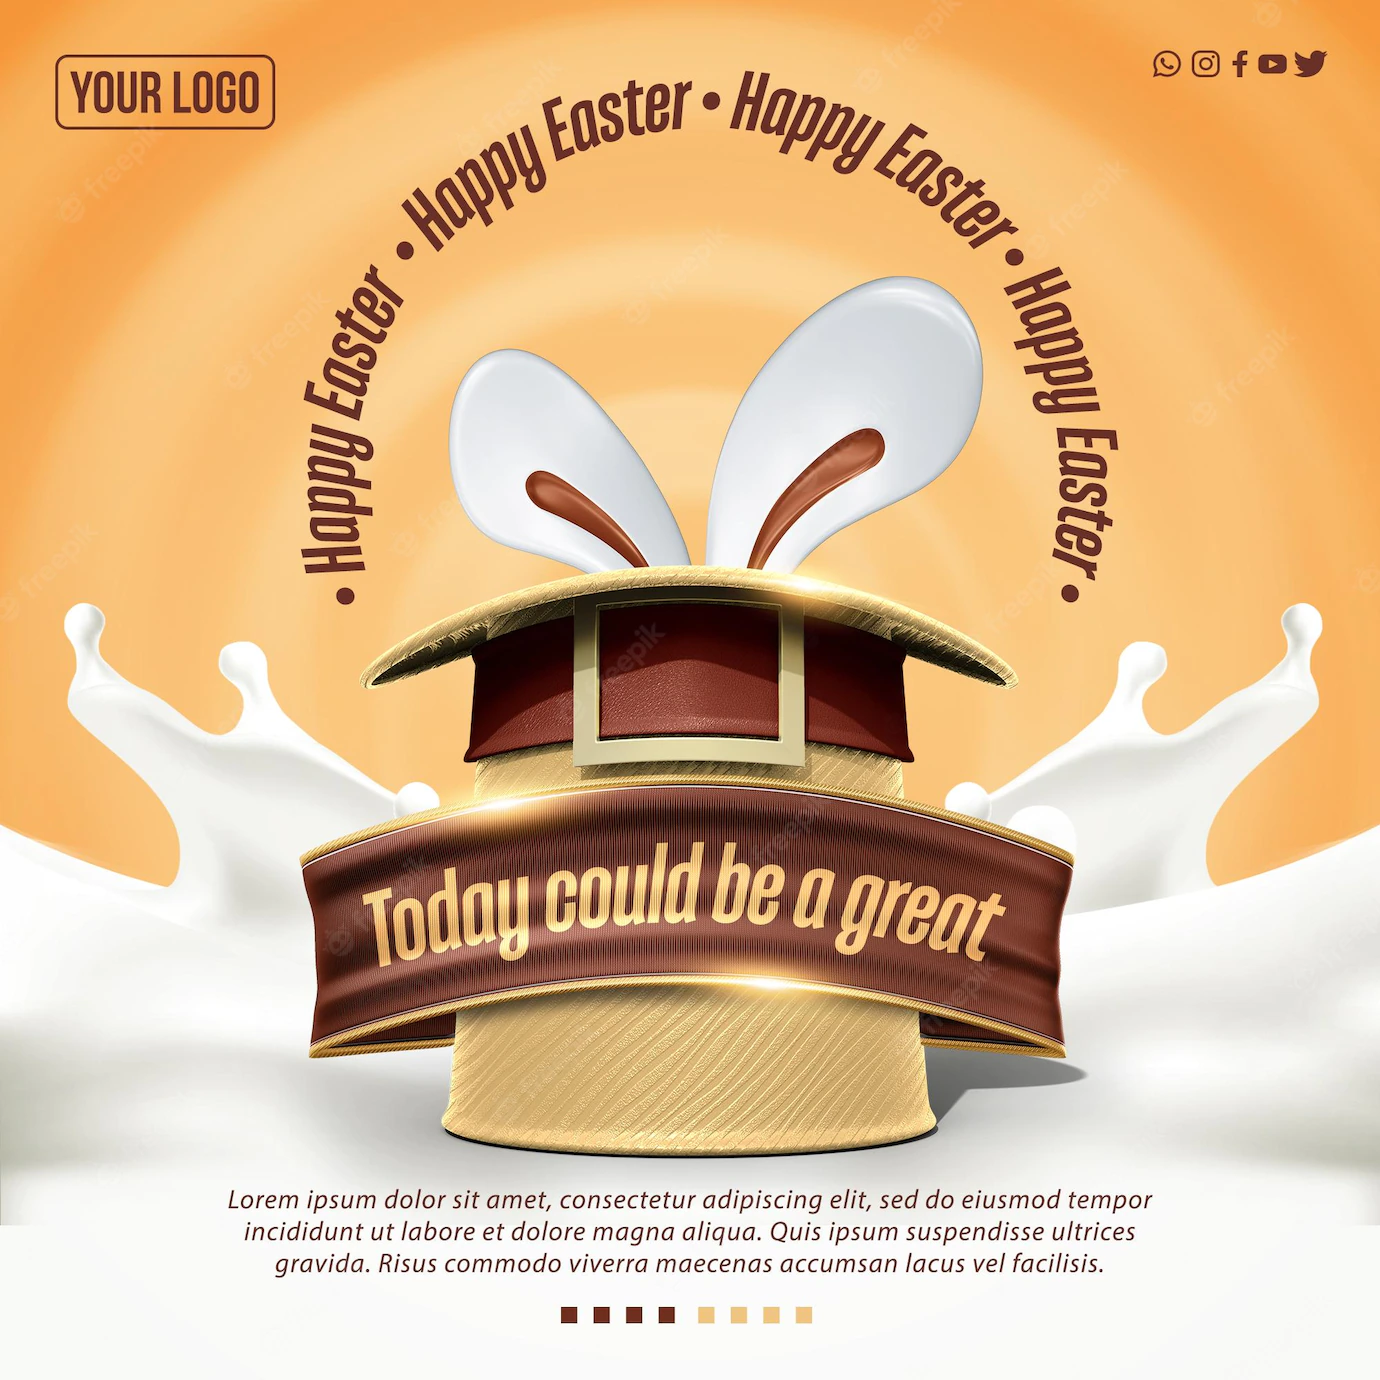 Social Media Feed Template Happy Easter Today Could Be Big Day 220664 2950